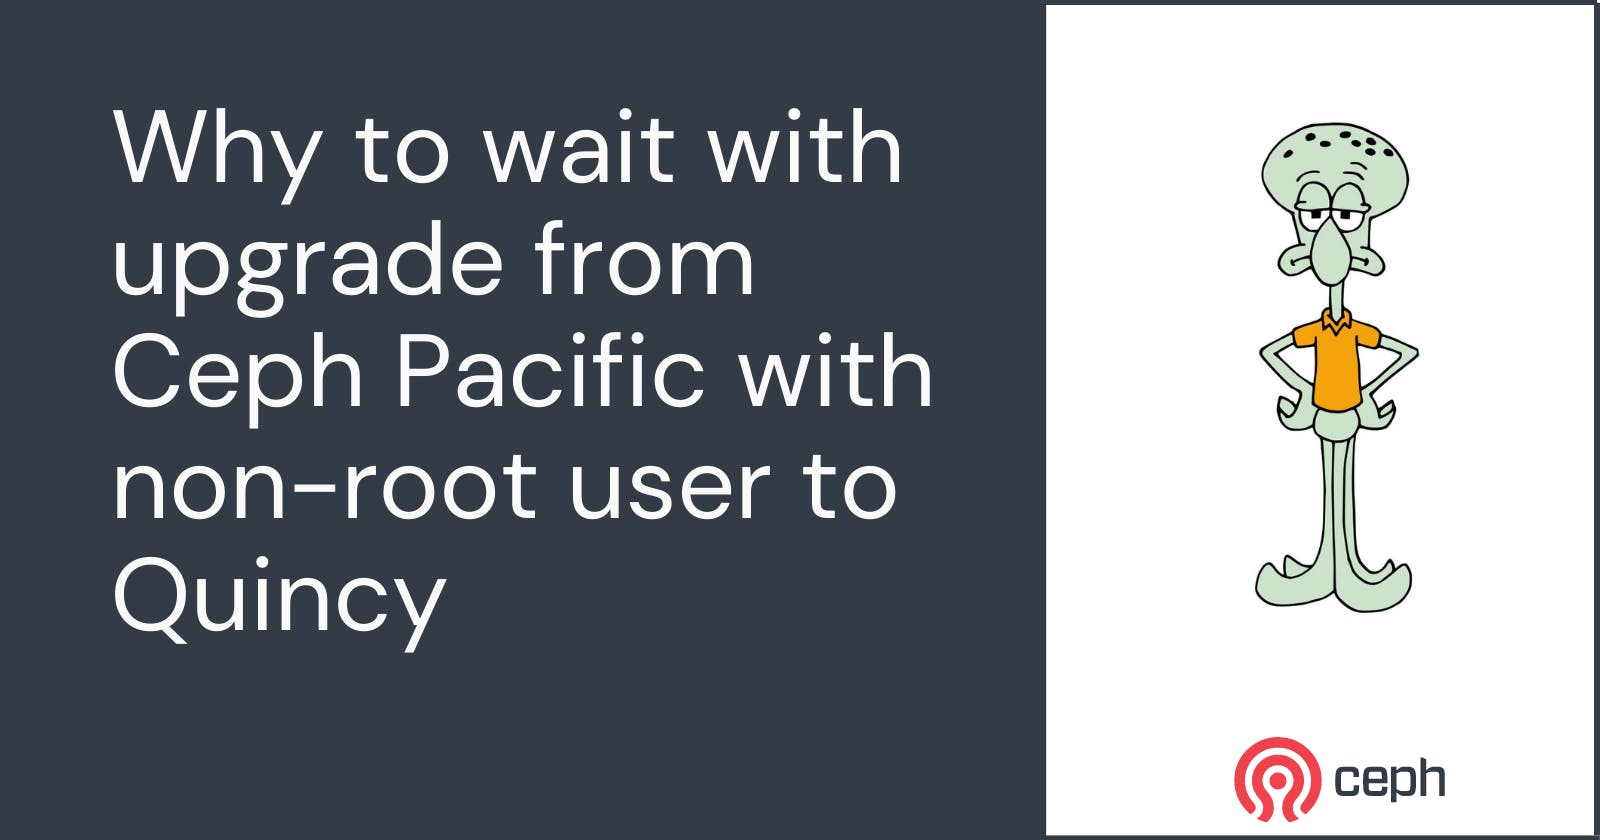 Why to wait with upgrade from Ceph Pacific with non-root user to Quincy